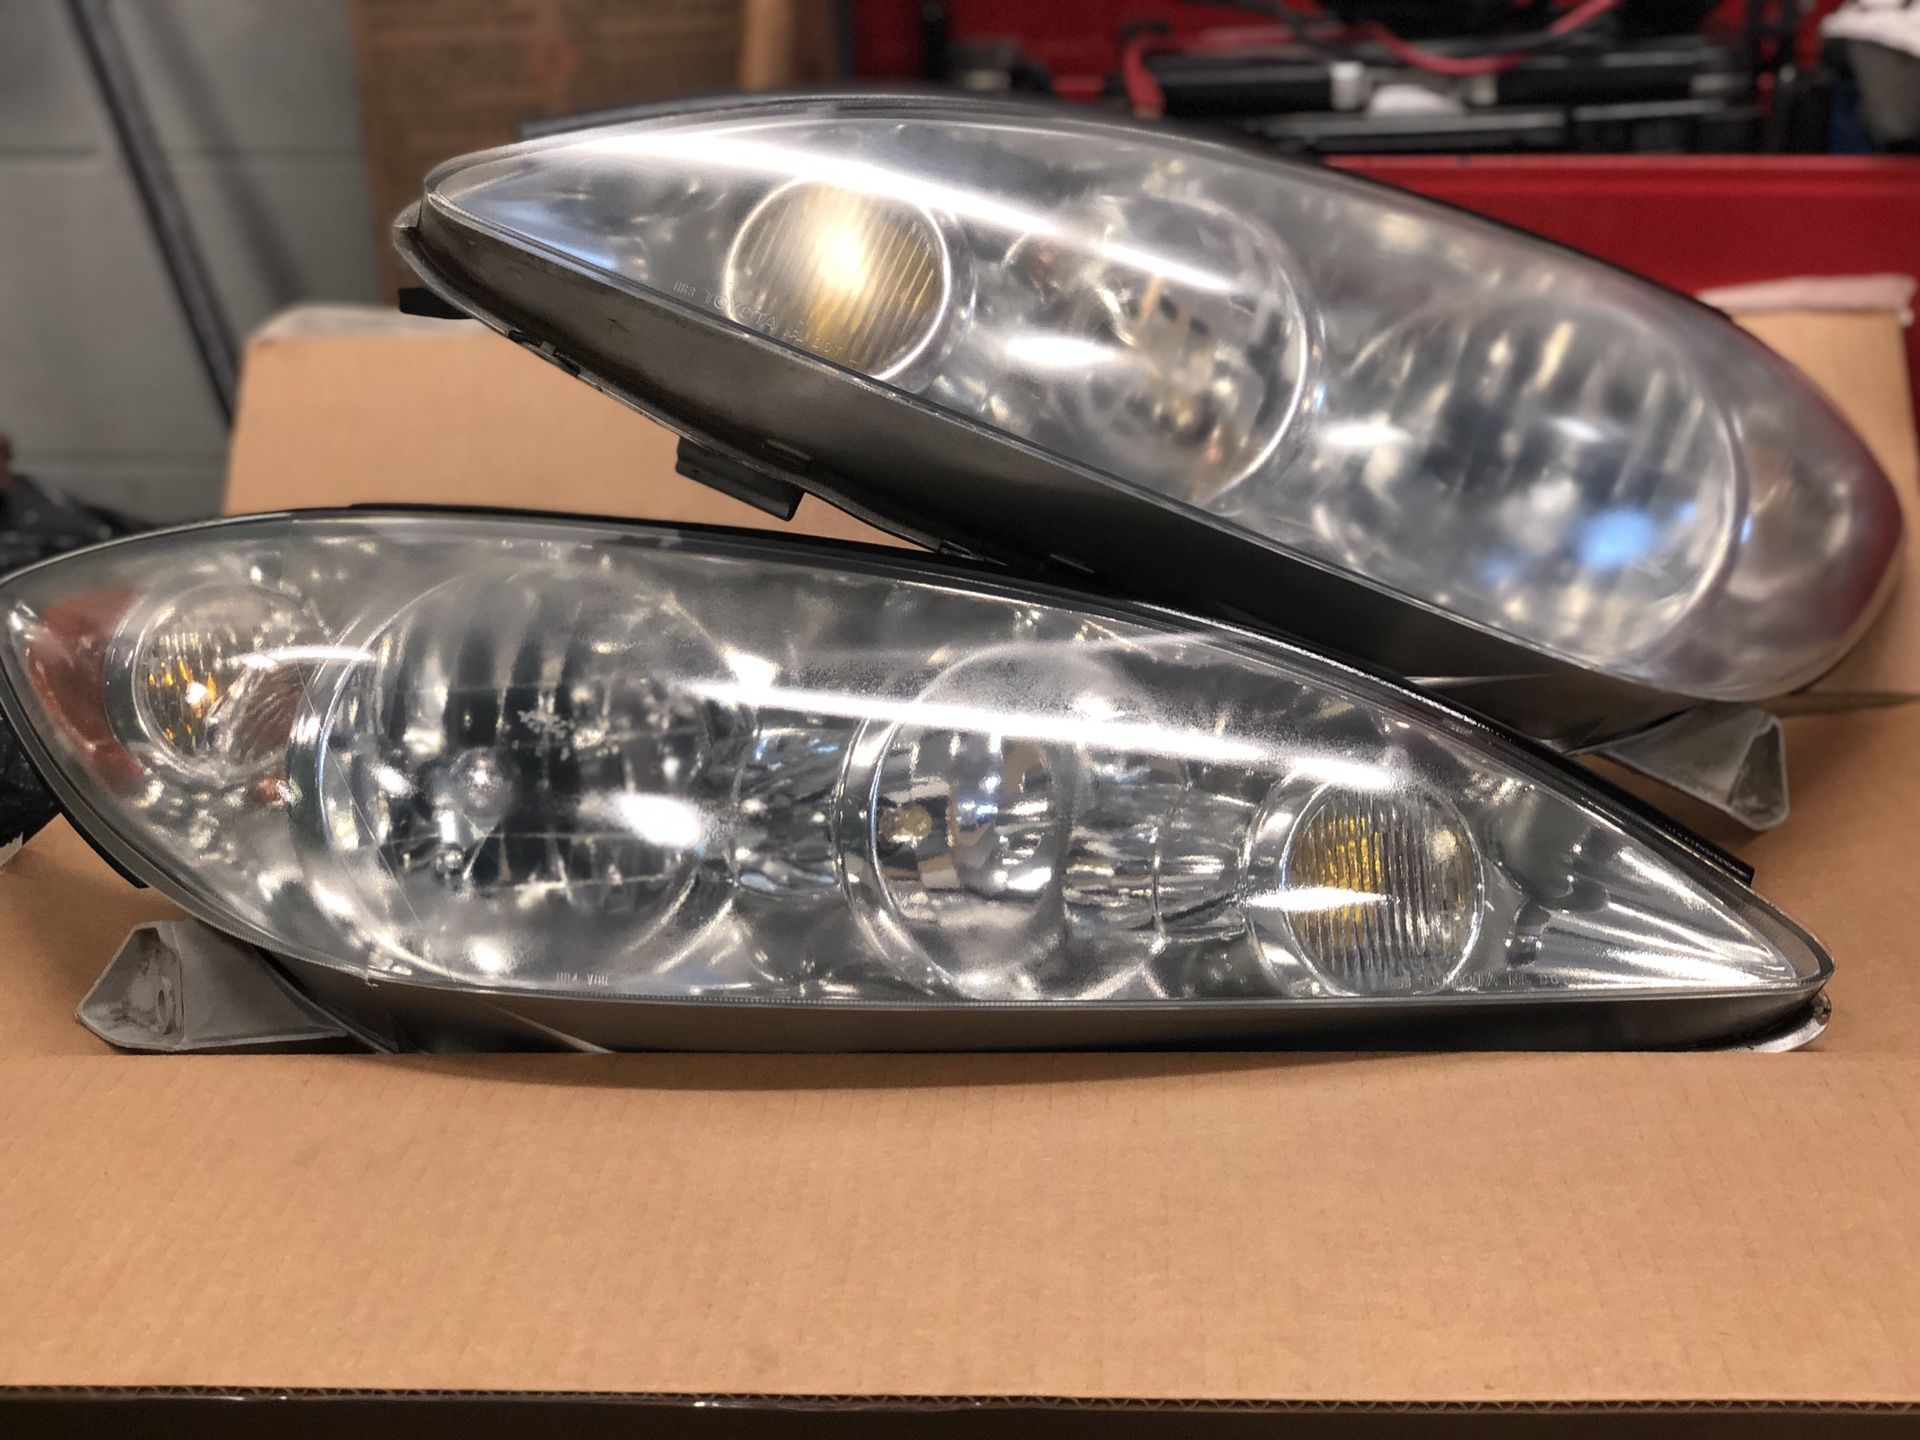 |Refurbished| 2005 Toyota Camry Headlights (comes with all bulbs)